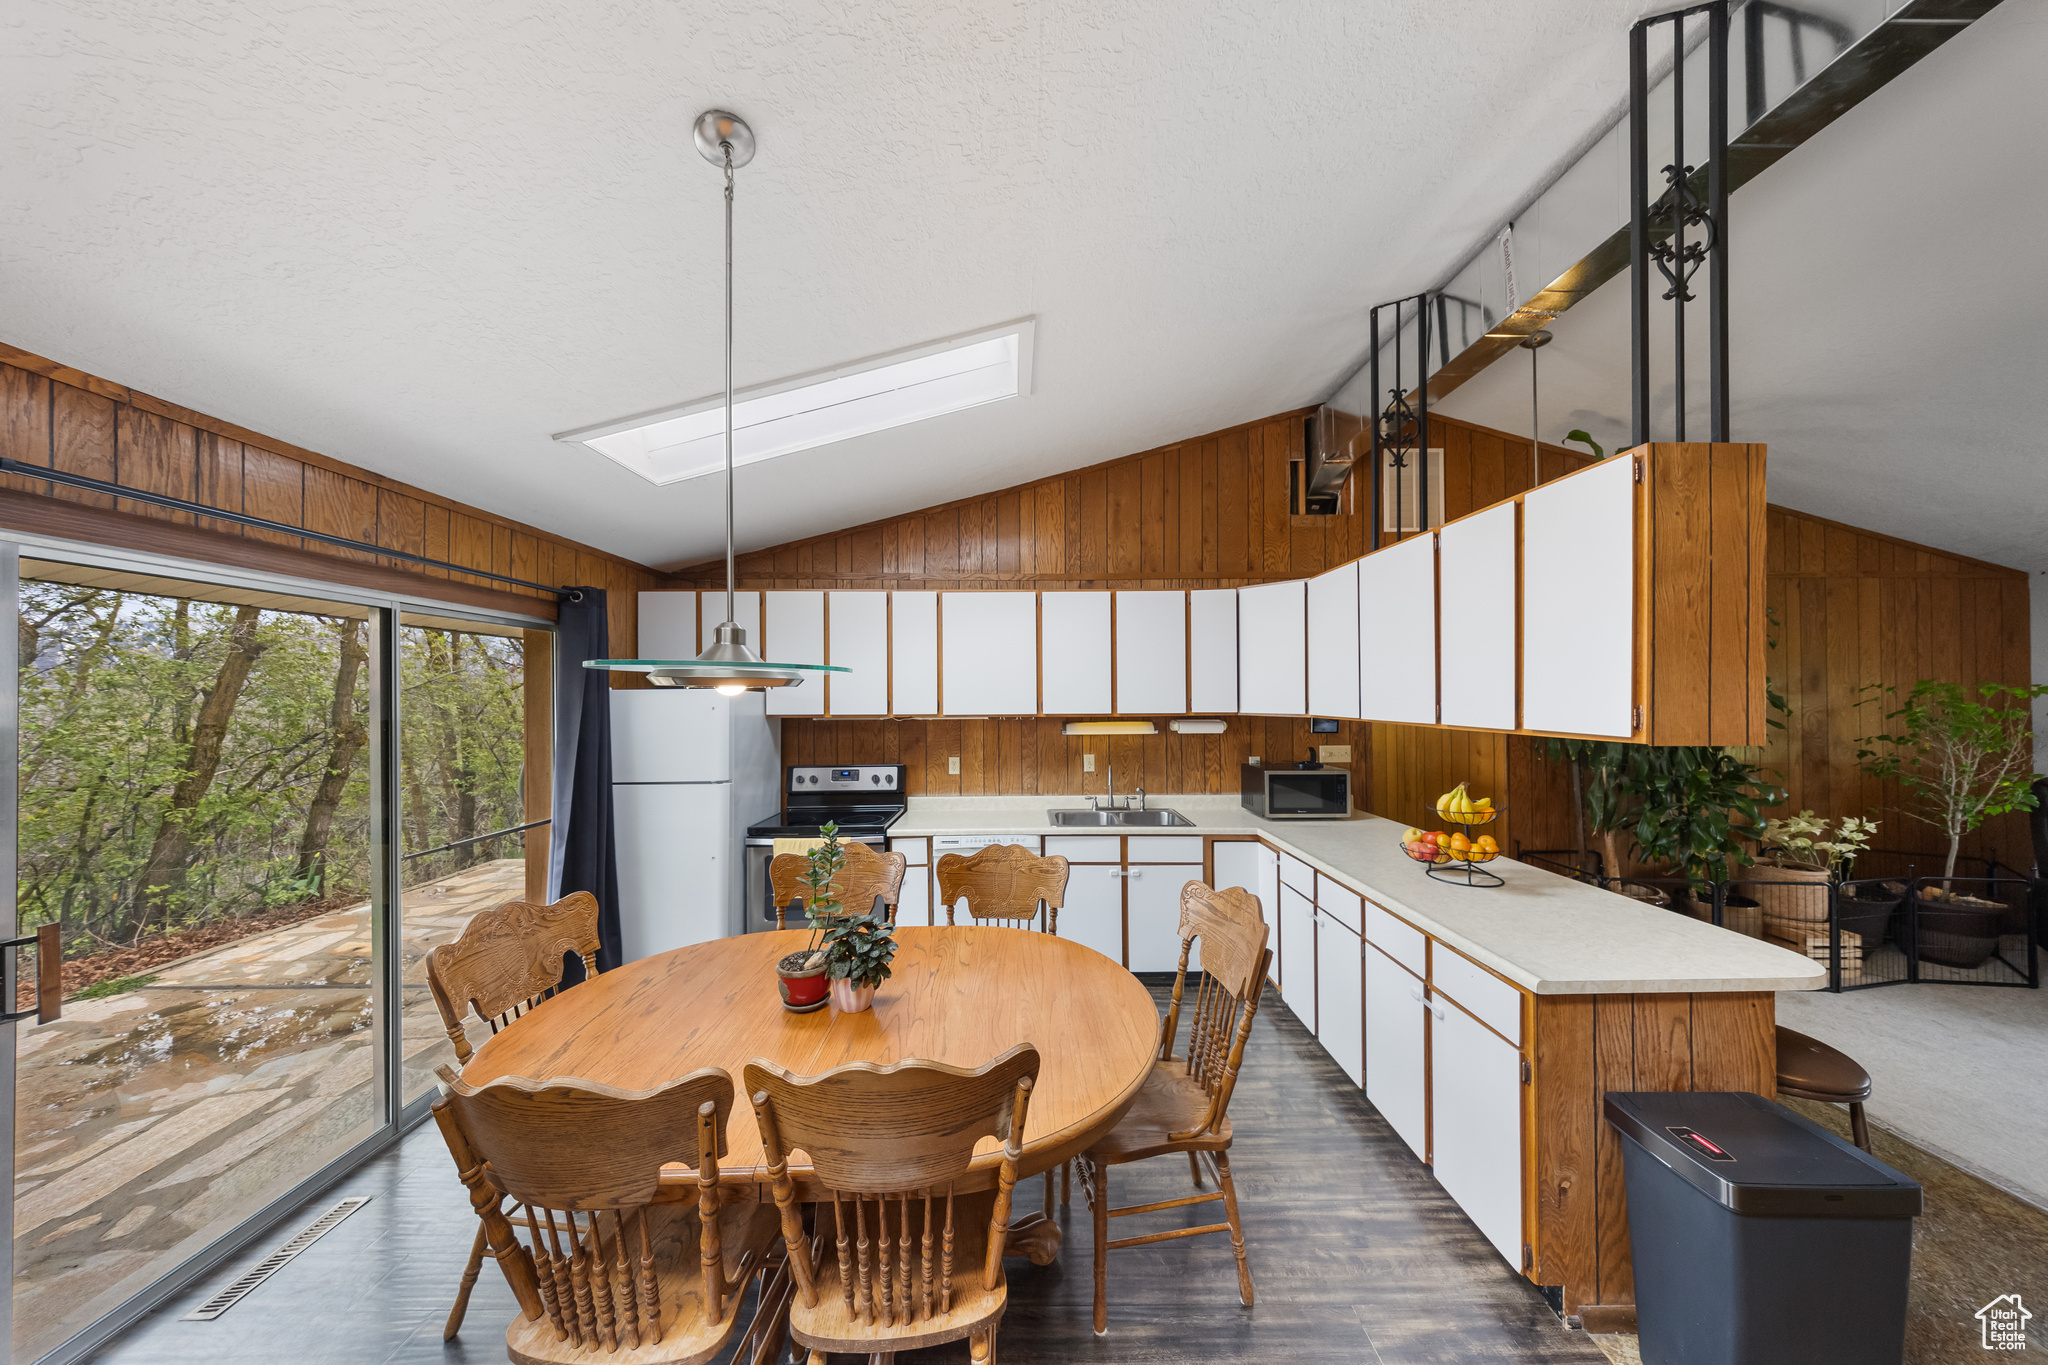 Carpeted dining space featuring sink, vaulted ceiling with skylight, and wood walls